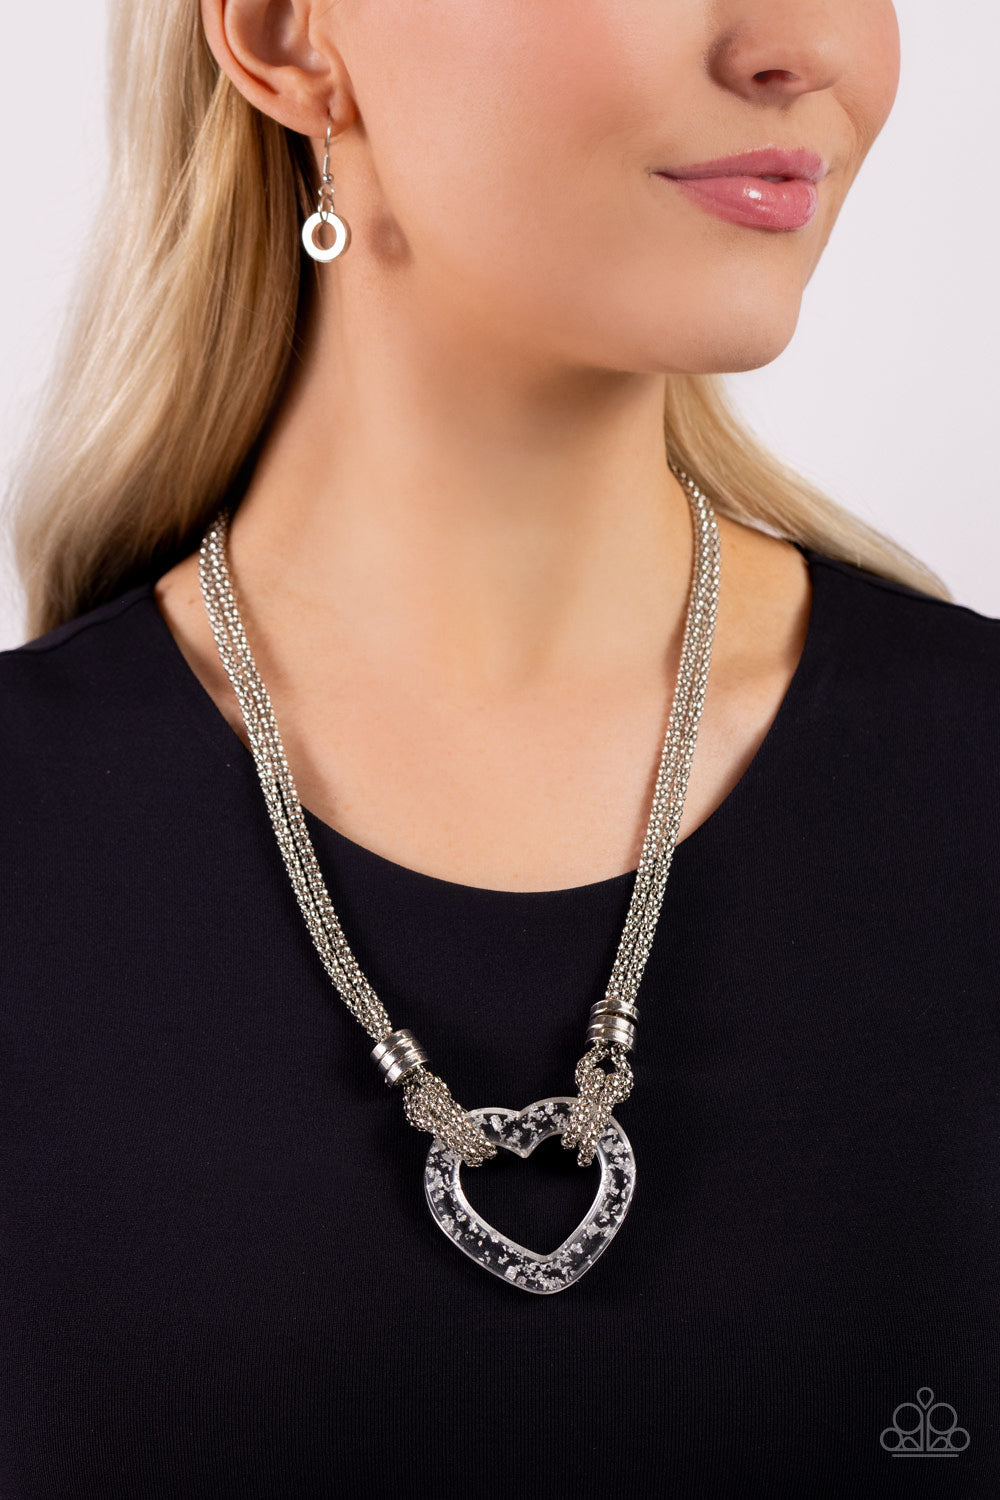 Lead with Your Heart - Silver Necklace - Paparazzi Accessories - Featuring a double-layered display of silver popcorn chain, a silver-flecked clear acrylic heart frame cascades down the neckline. Infused atop the acrylic heart, a trio of high-sheen silver rings adorns the layered chains for an industrial finish.